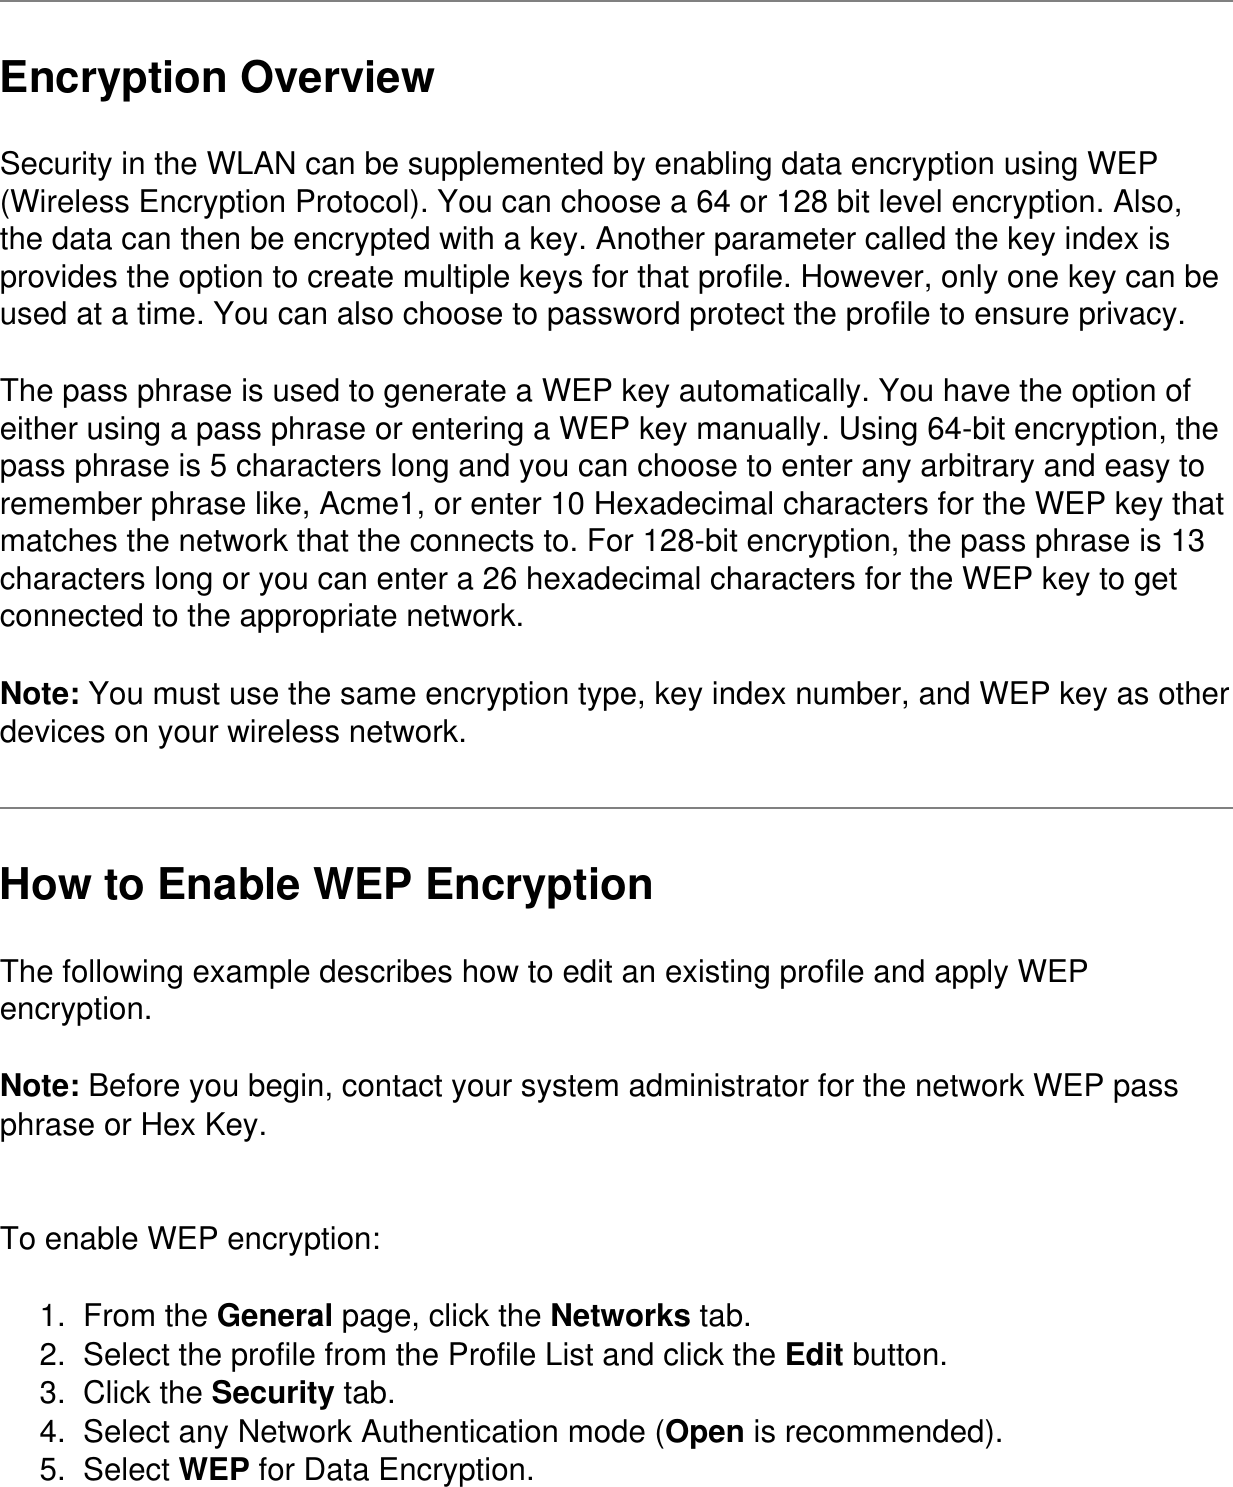 Encryption OverviewSecurity in the WLAN can be supplemented by enabling data encryption using WEP (Wireless Encryption Protocol). You can choose a 64 or 128 bit level encryption. Also, the data can then be encrypted with a key. Another parameter called the key index is provides the option to create multiple keys for that profile. However, only one key can be used at a time. You can also choose to password protect the profile to ensure privacy.The pass phrase is used to generate a WEP key automatically. You have the option of either using a pass phrase or entering a WEP key manually. Using 64-bit encryption, the pass phrase is 5 characters long and you can choose to enter any arbitrary and easy to remember phrase like, Acme1, or enter 10 Hexadecimal characters for the WEP key that matches the network that the connects to. For 128-bit encryption, the pass phrase is 13 characters long or you can enter a 26 hexadecimal characters for the WEP key to get connected to the appropriate network.Note: You must use the same encryption type, key index number, and WEP key as other devices on your wireless network. How to Enable WEP EncryptionThe following example describes how to edit an existing profile and apply WEP encryption.Note: Before you begin, contact your system administrator for the network WEP pass phrase or Hex Key. To enable WEP encryption:1.  From the General page, click the Networks tab.2.  Select the profile from the Profile List and click the Edit button.3.  Click the Security tab.4.  Select any Network Authentication mode (Open is recommended).5.  Select WEP for Data Encryption.